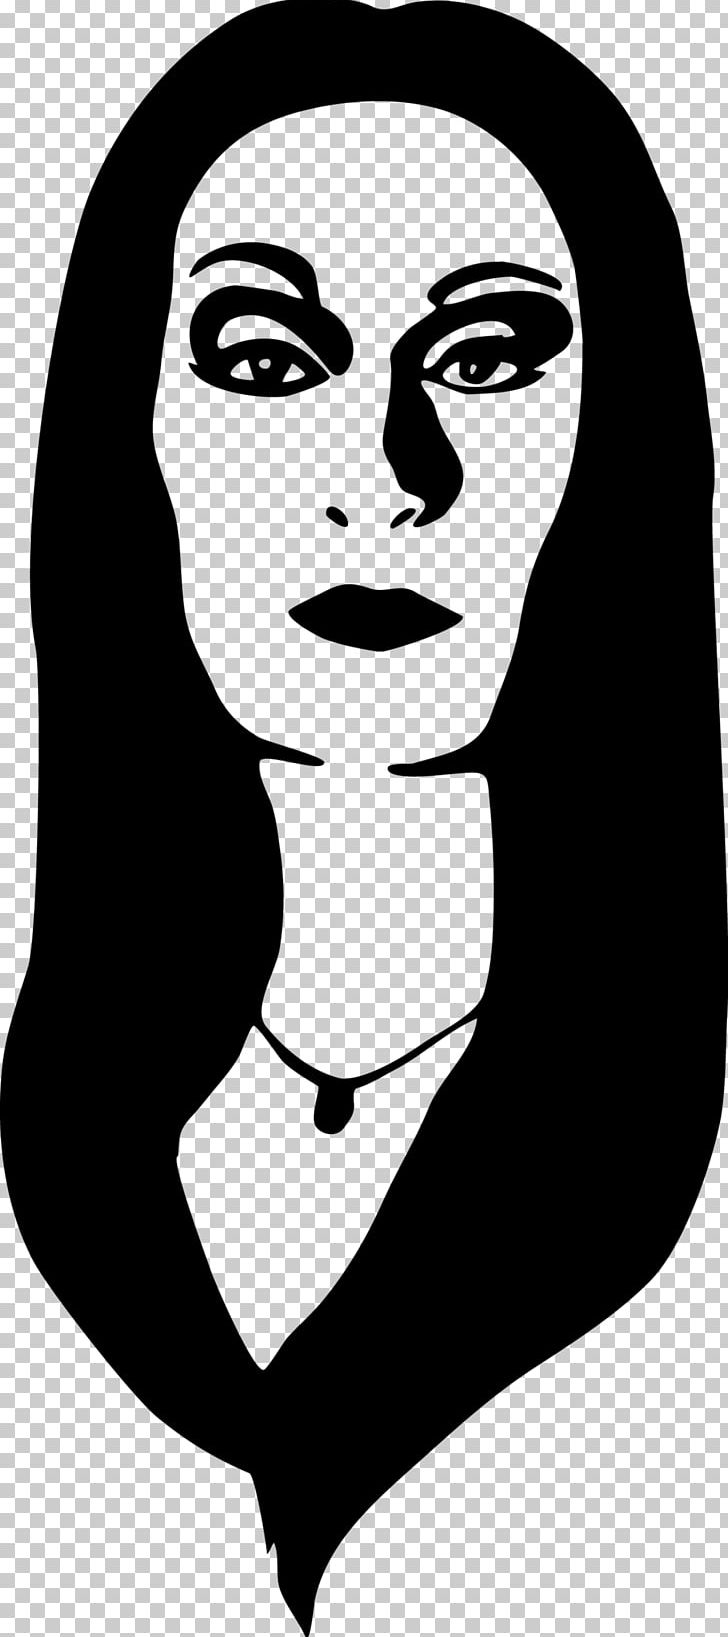 Morticia Addams The Addams Family Wednesday Addams Gomez Addams Drawing PNG, Clipart, Art, Artist, Artwork, Black, Black And White Free PNG Download